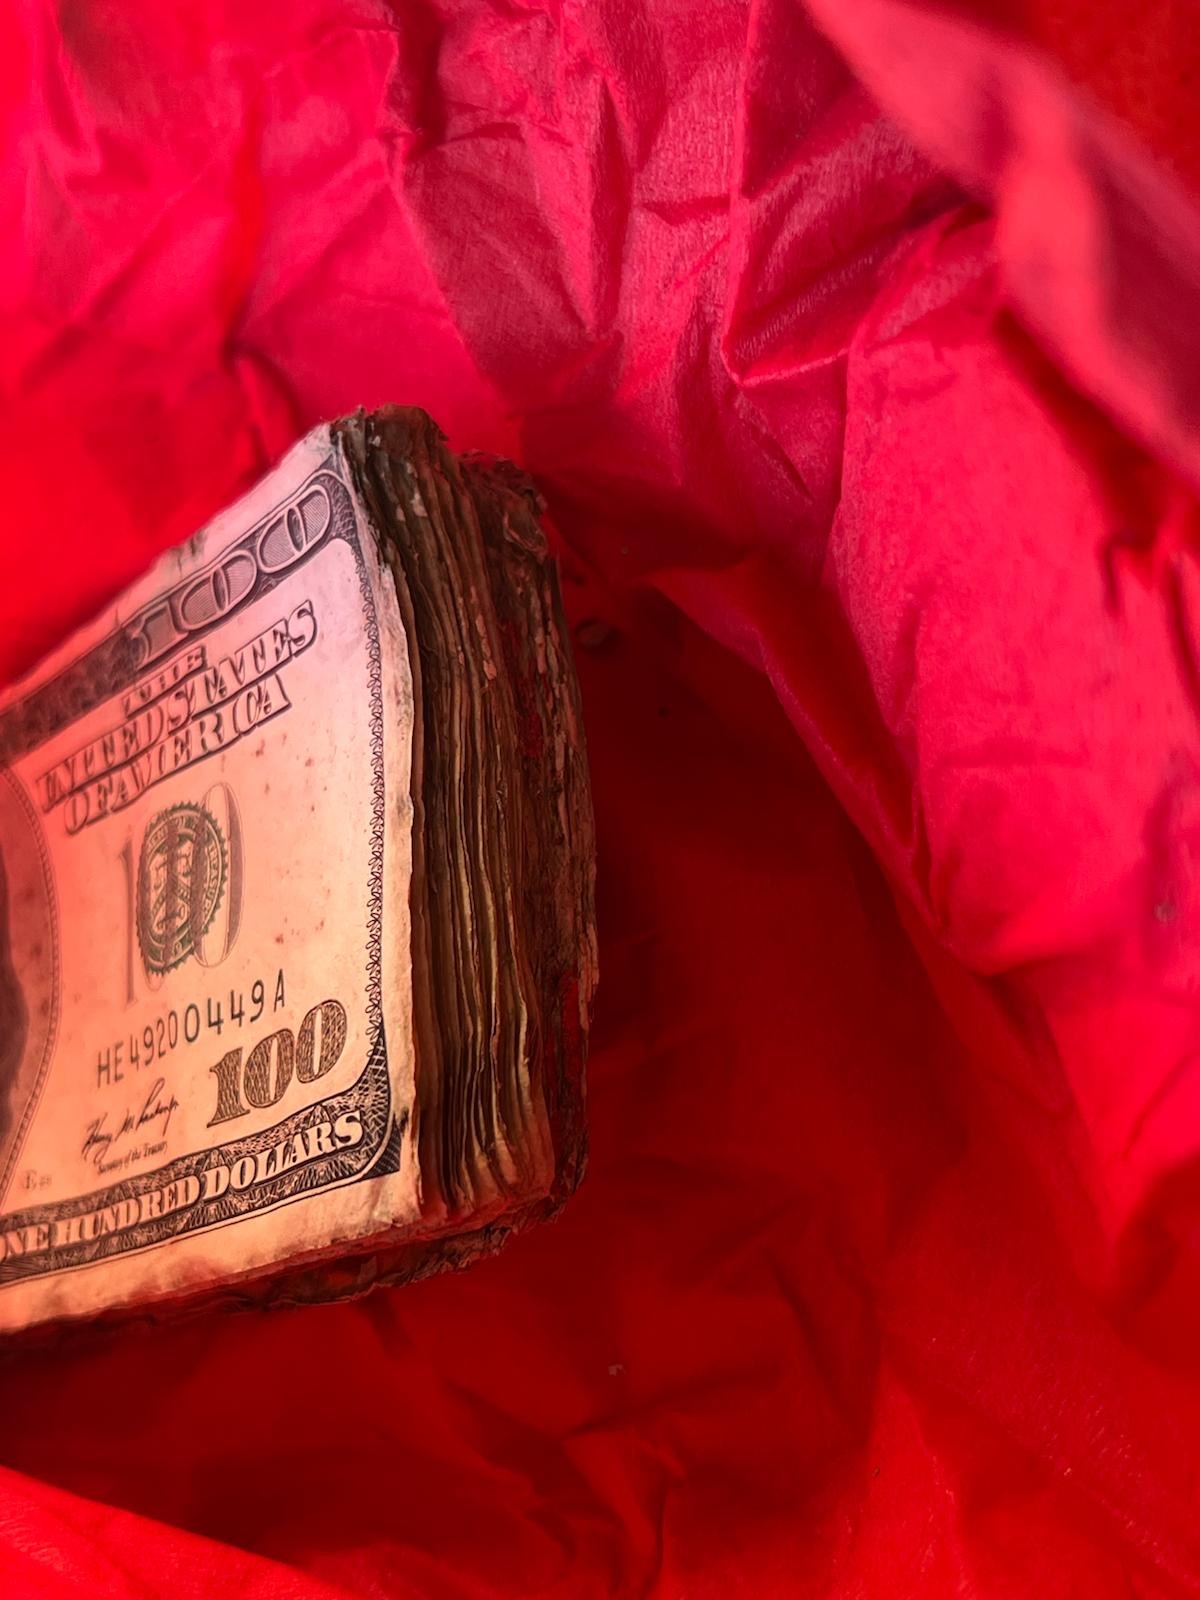 A wad of weathered $100 bills rests on crinkled red tissue.